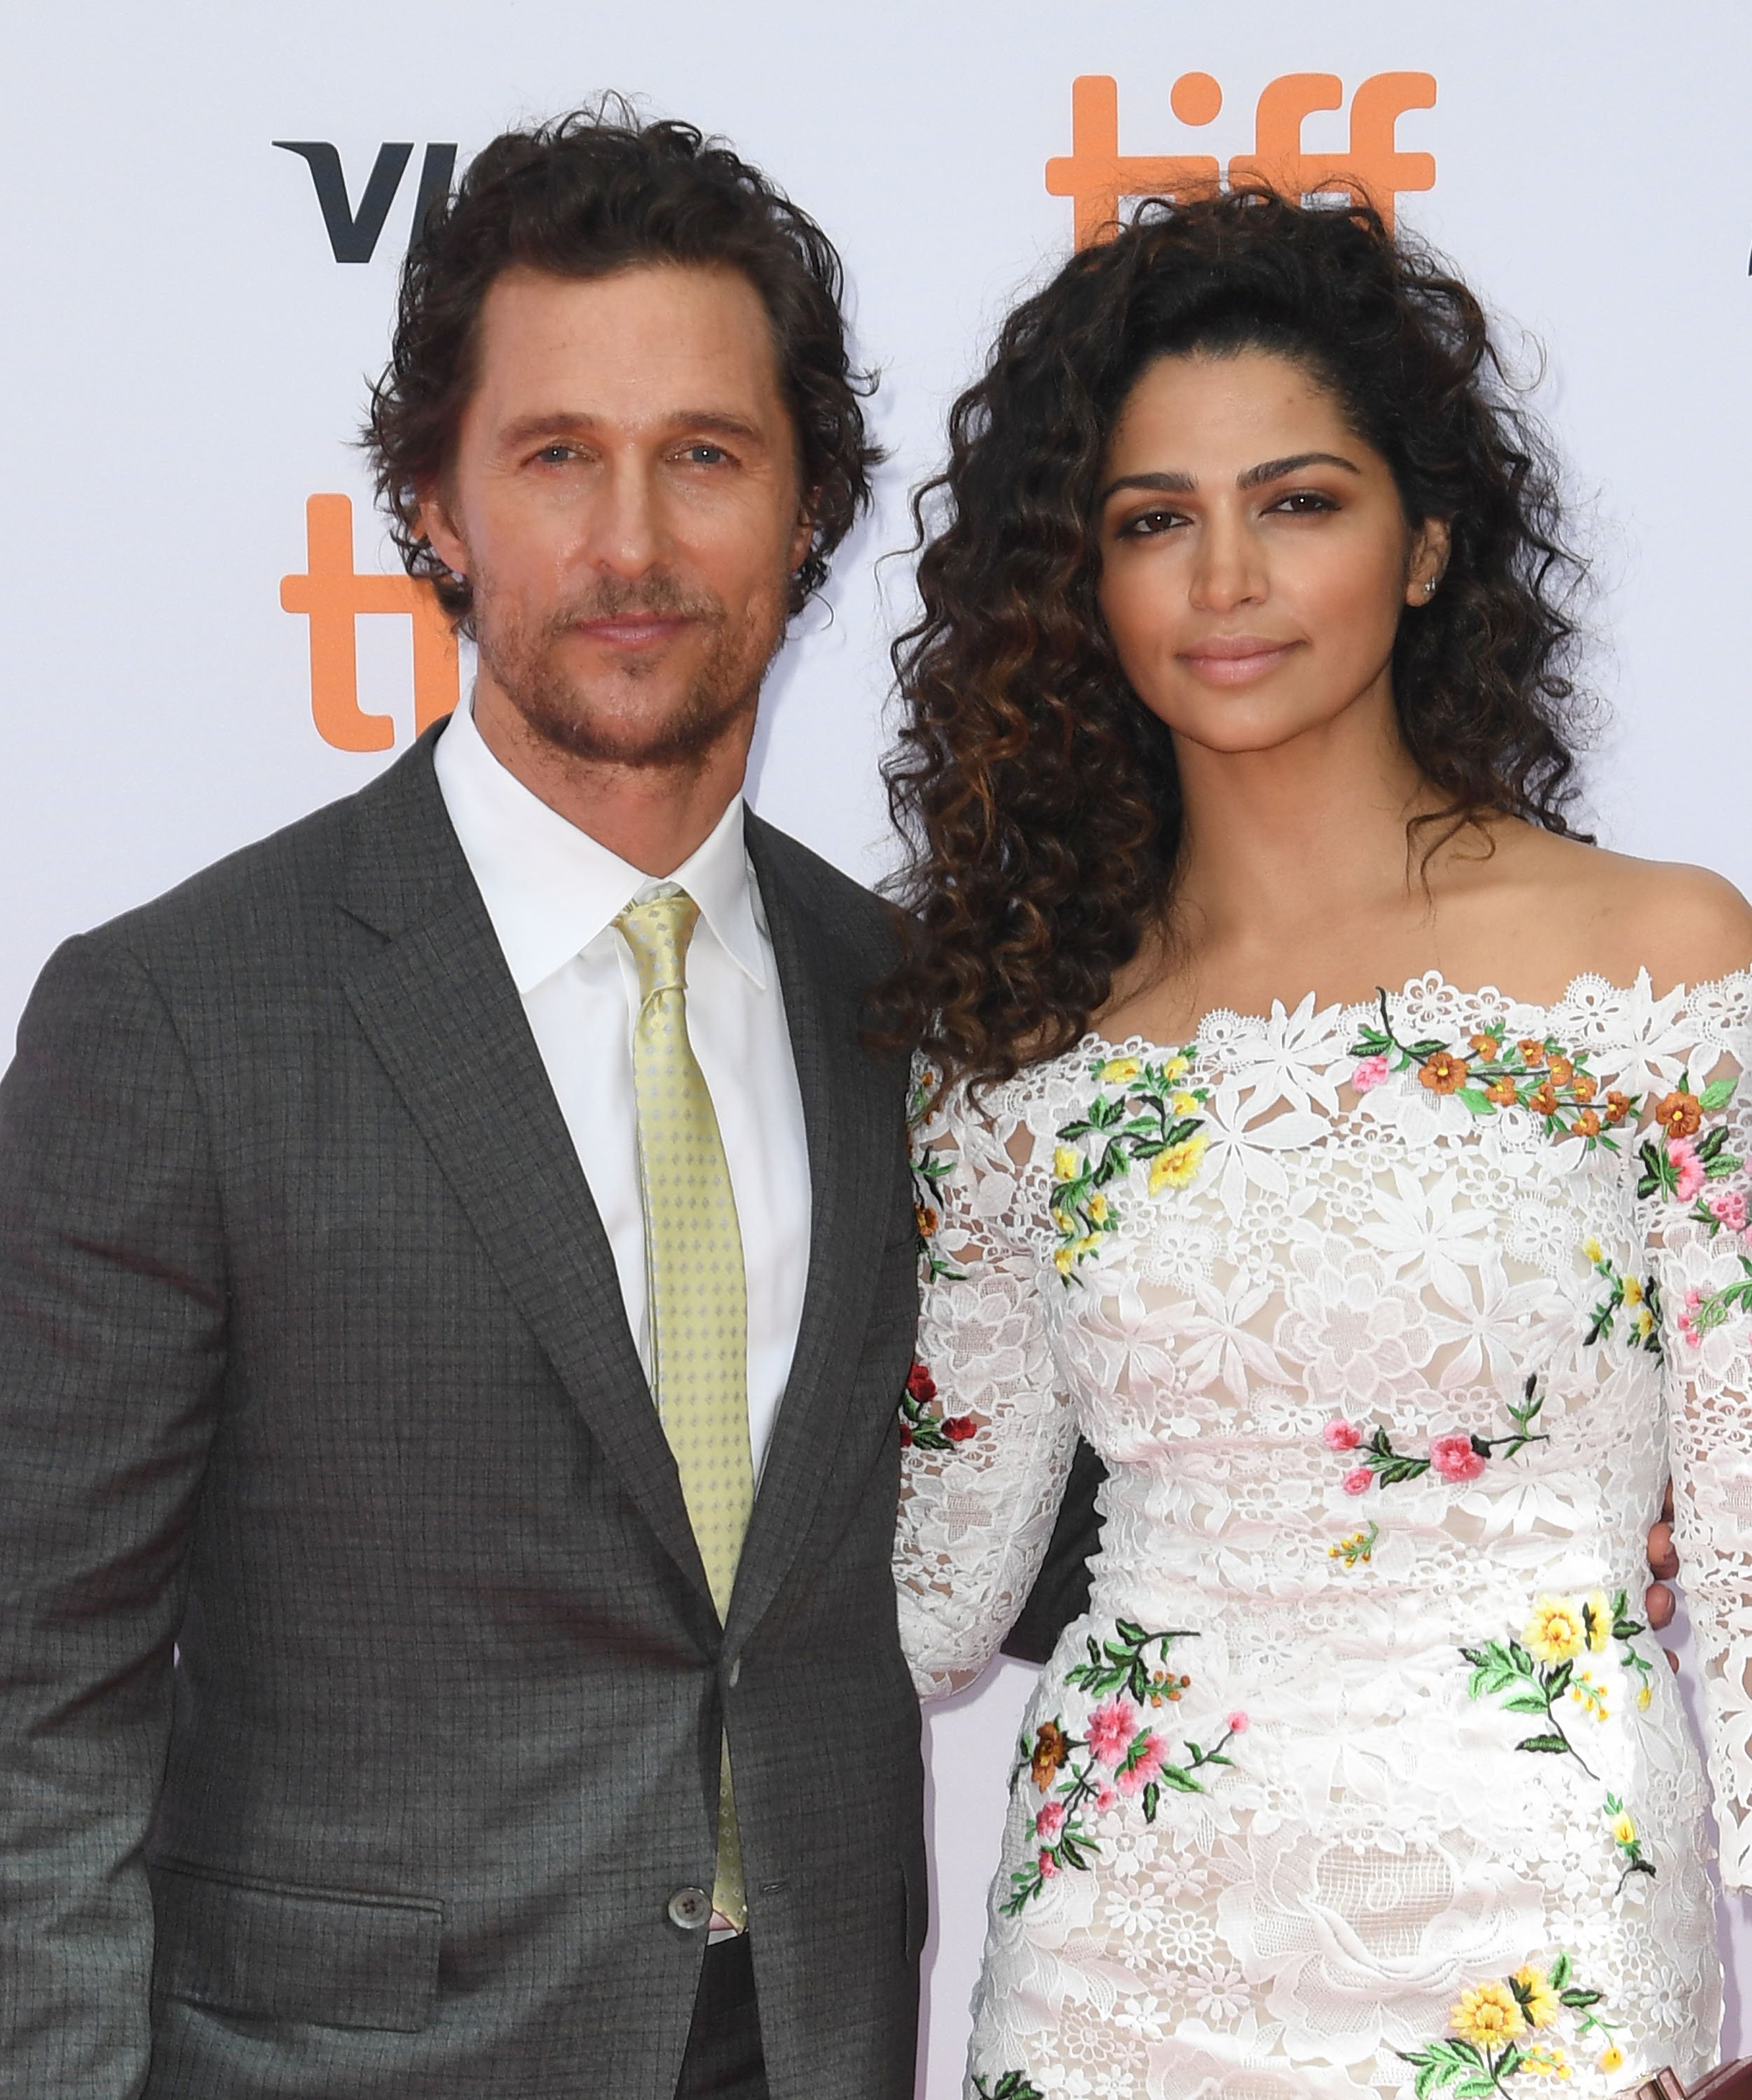 Matthew McConaughey and wife Camila Alves attend the premiere of 'Sing' during the 2016 Toronto International Film Festival at Princess of Wales Theatre on September 11, 2016 | Source: Getty Images